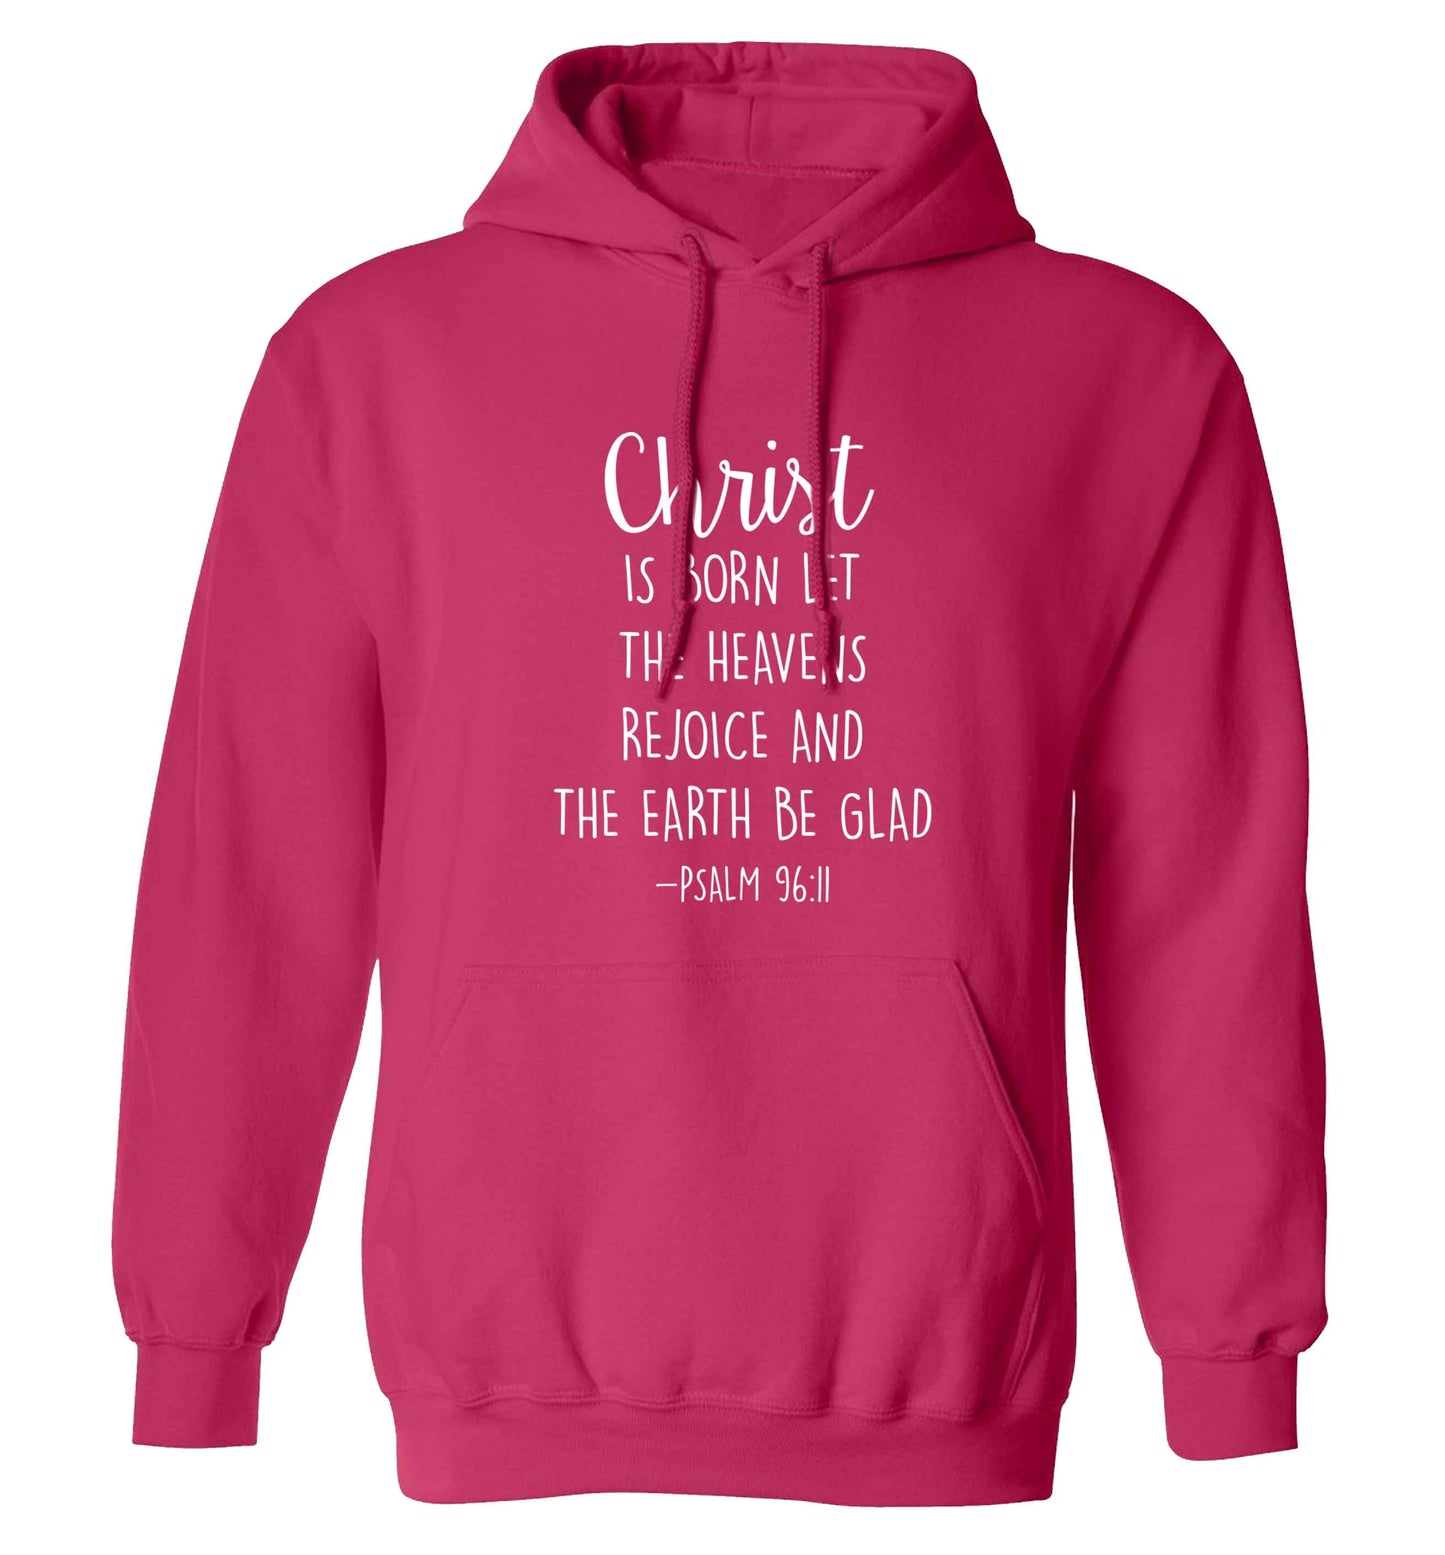 Christ is Born Psalm 96:11 adults unisex pink hoodie 2XL